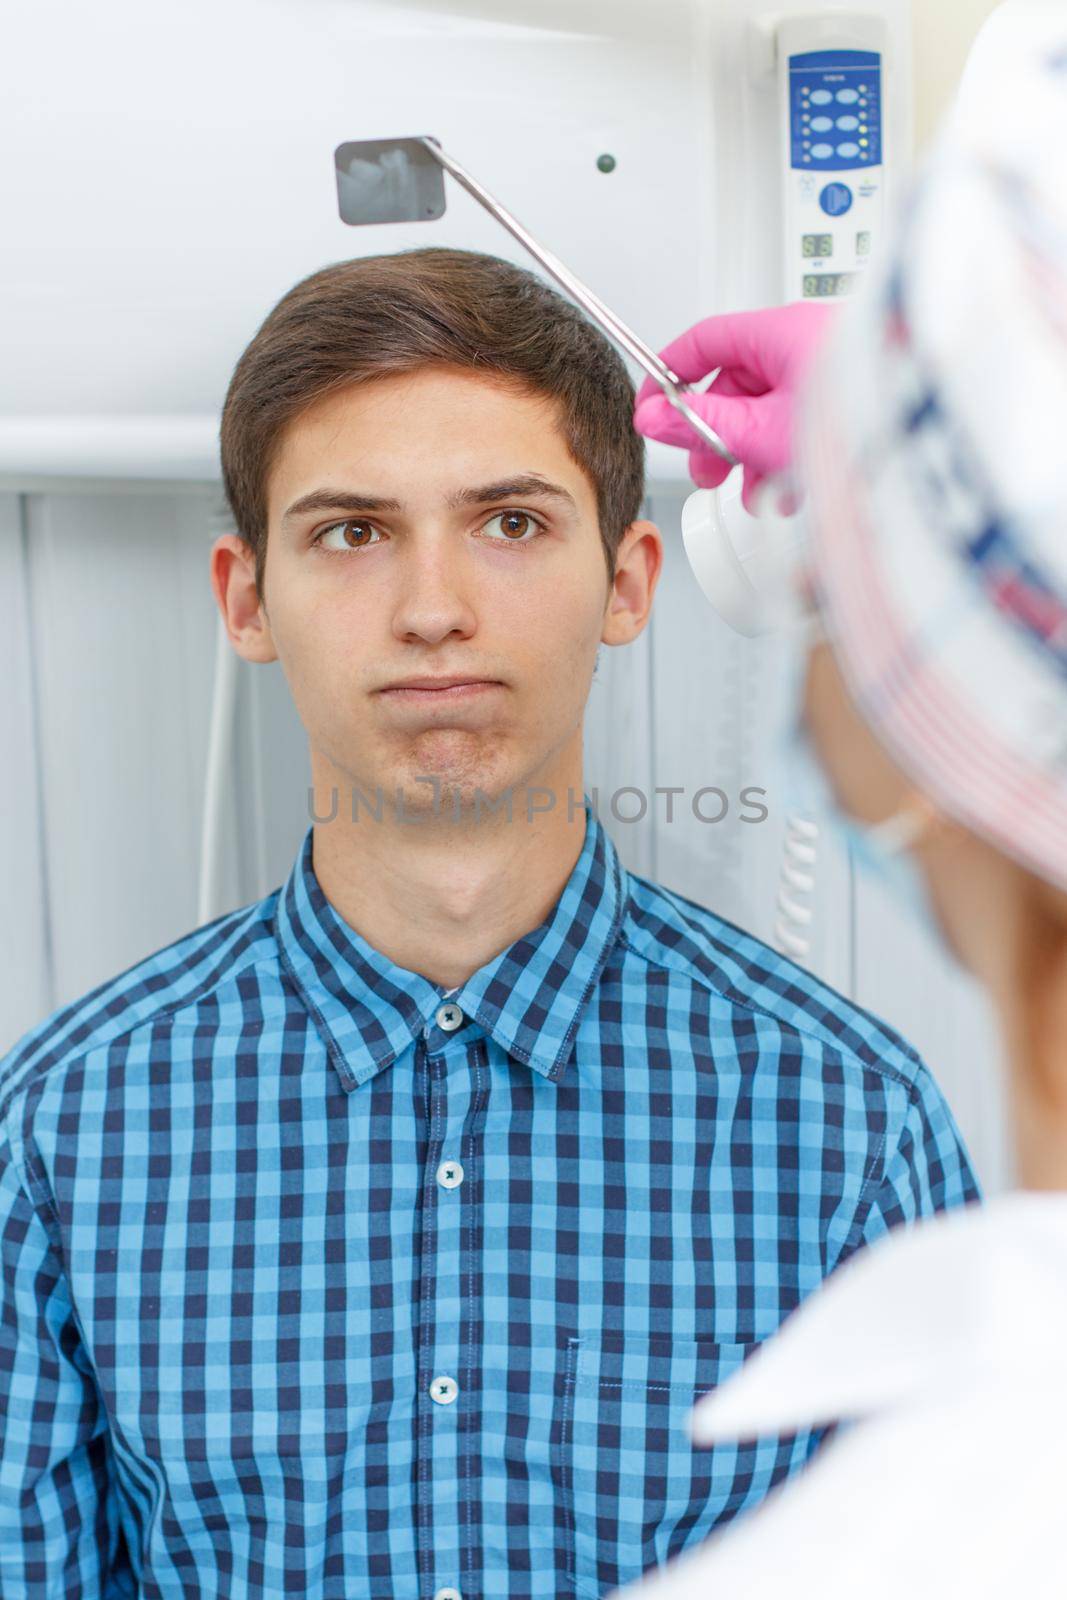 Female dentist and patient in the dental office are looking at a dental x-ray. The patient is disappointed with the results. Dentistry